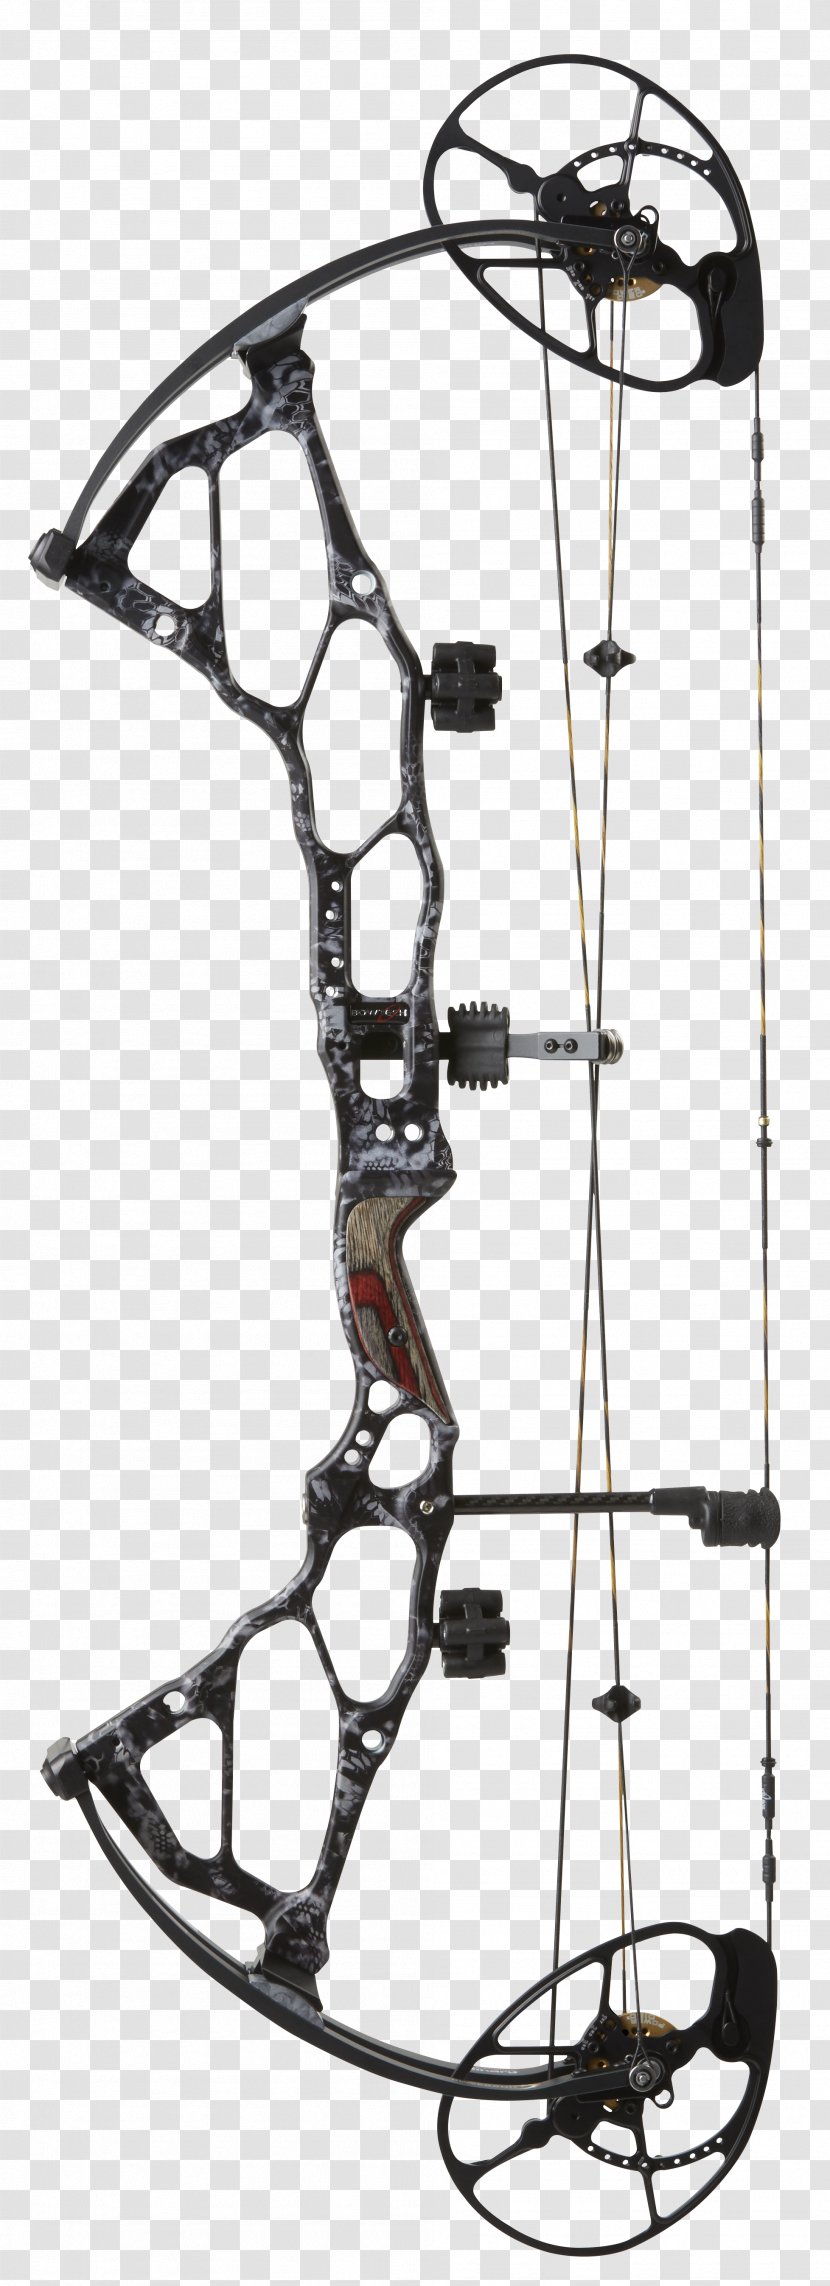 Bow And Arrow Compound Bows Archery Bowhunting - Hunting Transparent PNG